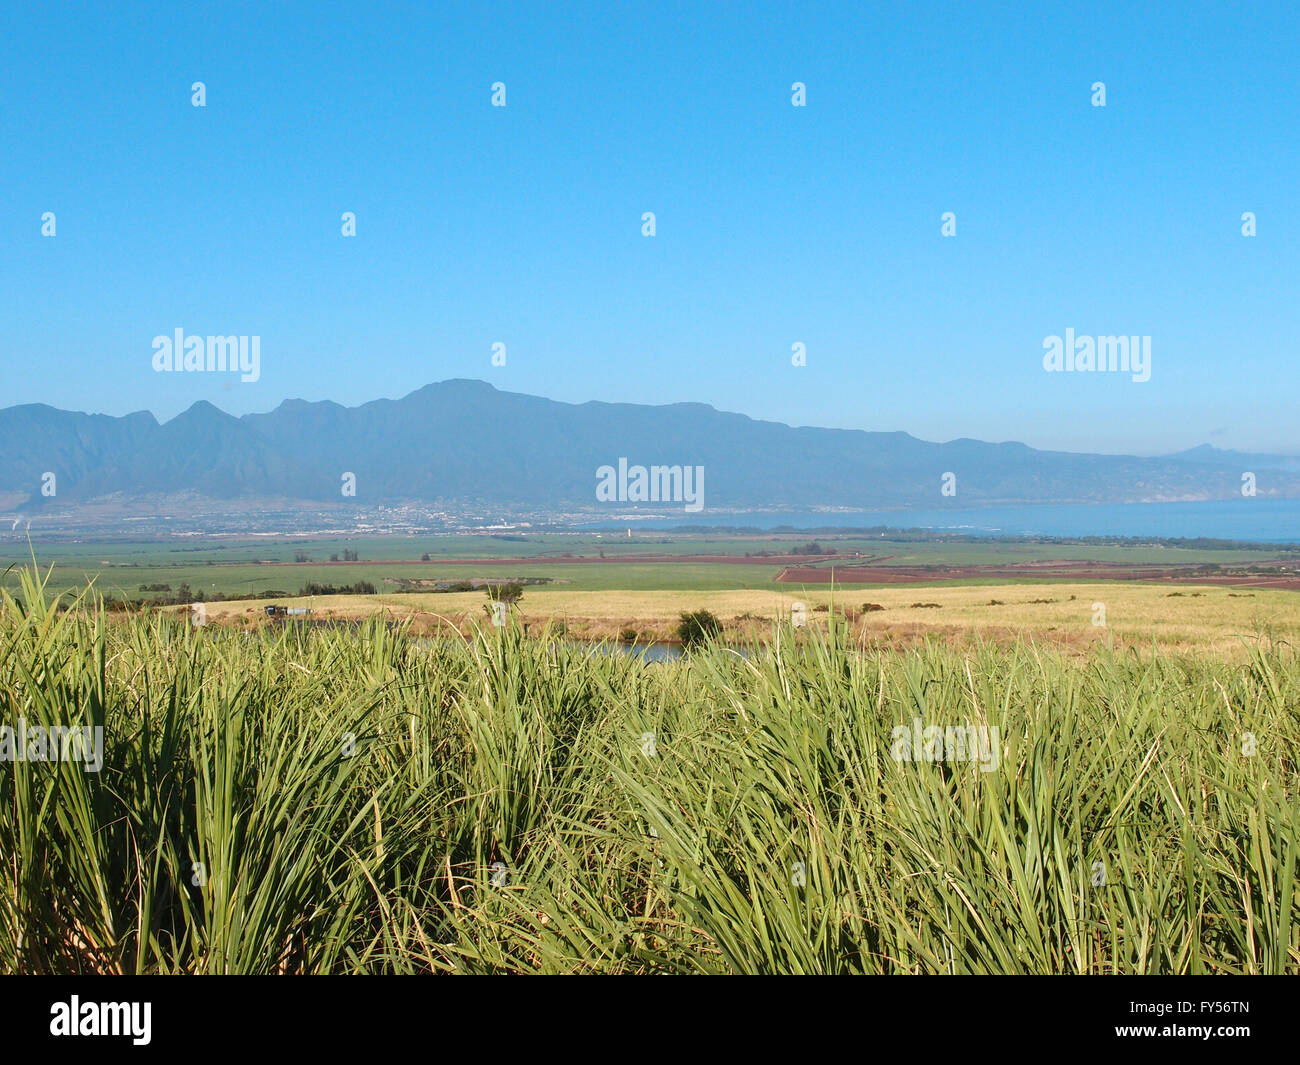 Maui Landscape view of sugarcane crops, mountains, coast, and ocean in Kahului, Maui, Hawaii on as beautiful day. Stock Photo